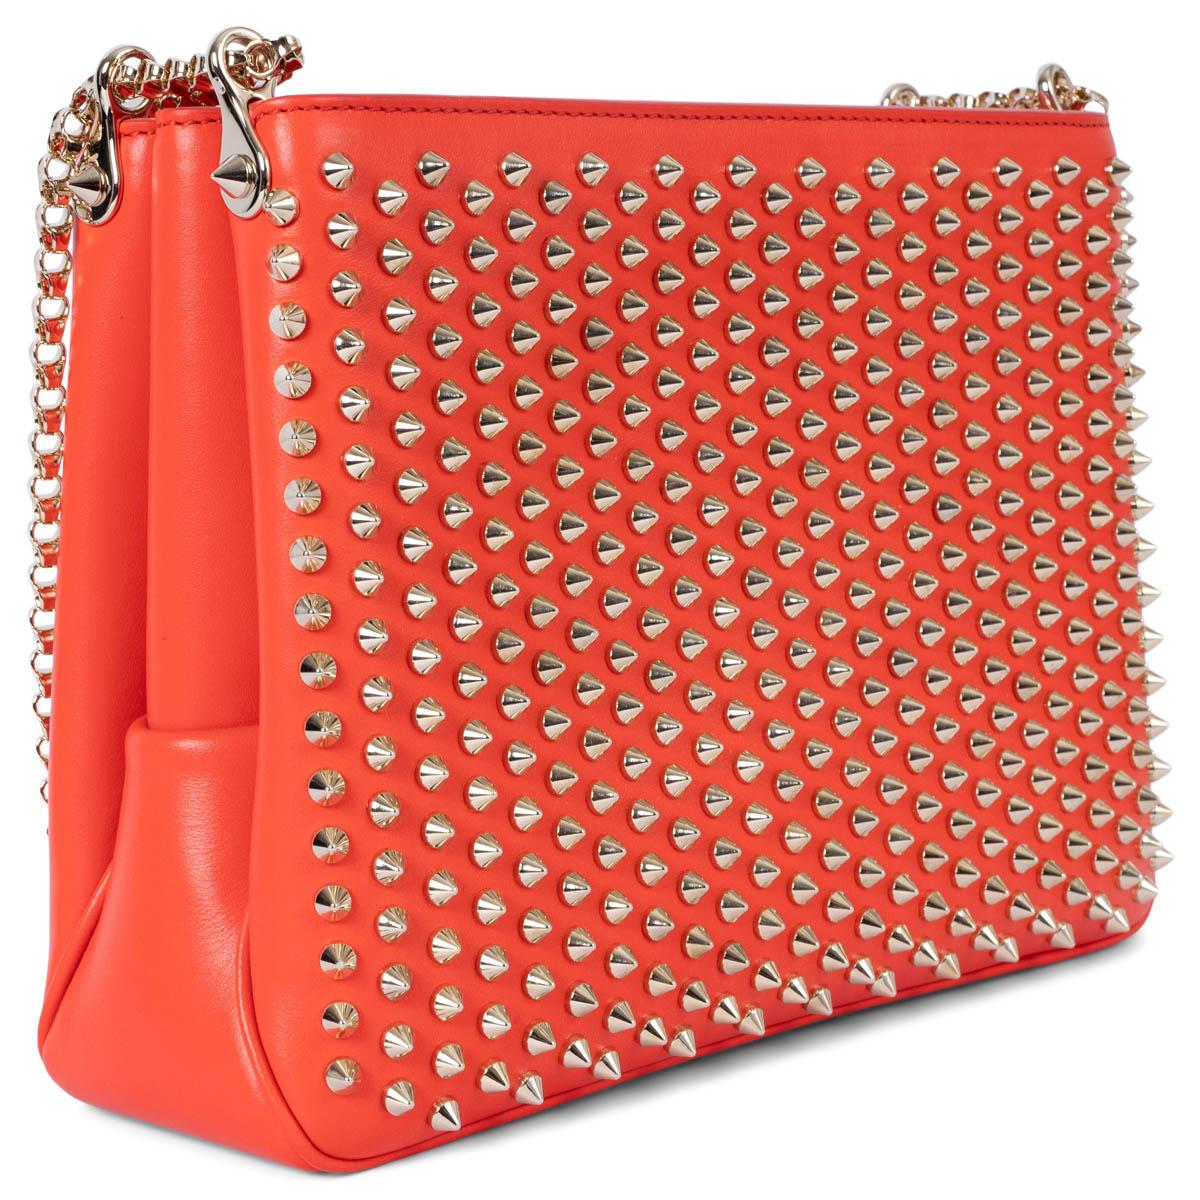 100% authentic Christian Louboutin 2016 Triloubi Large Spiked shoulder bag in capucine leather featuring gold-tone hardware. The design features three zipper compartments and is lined in red alcantara with one open pocket against the back. Brand new